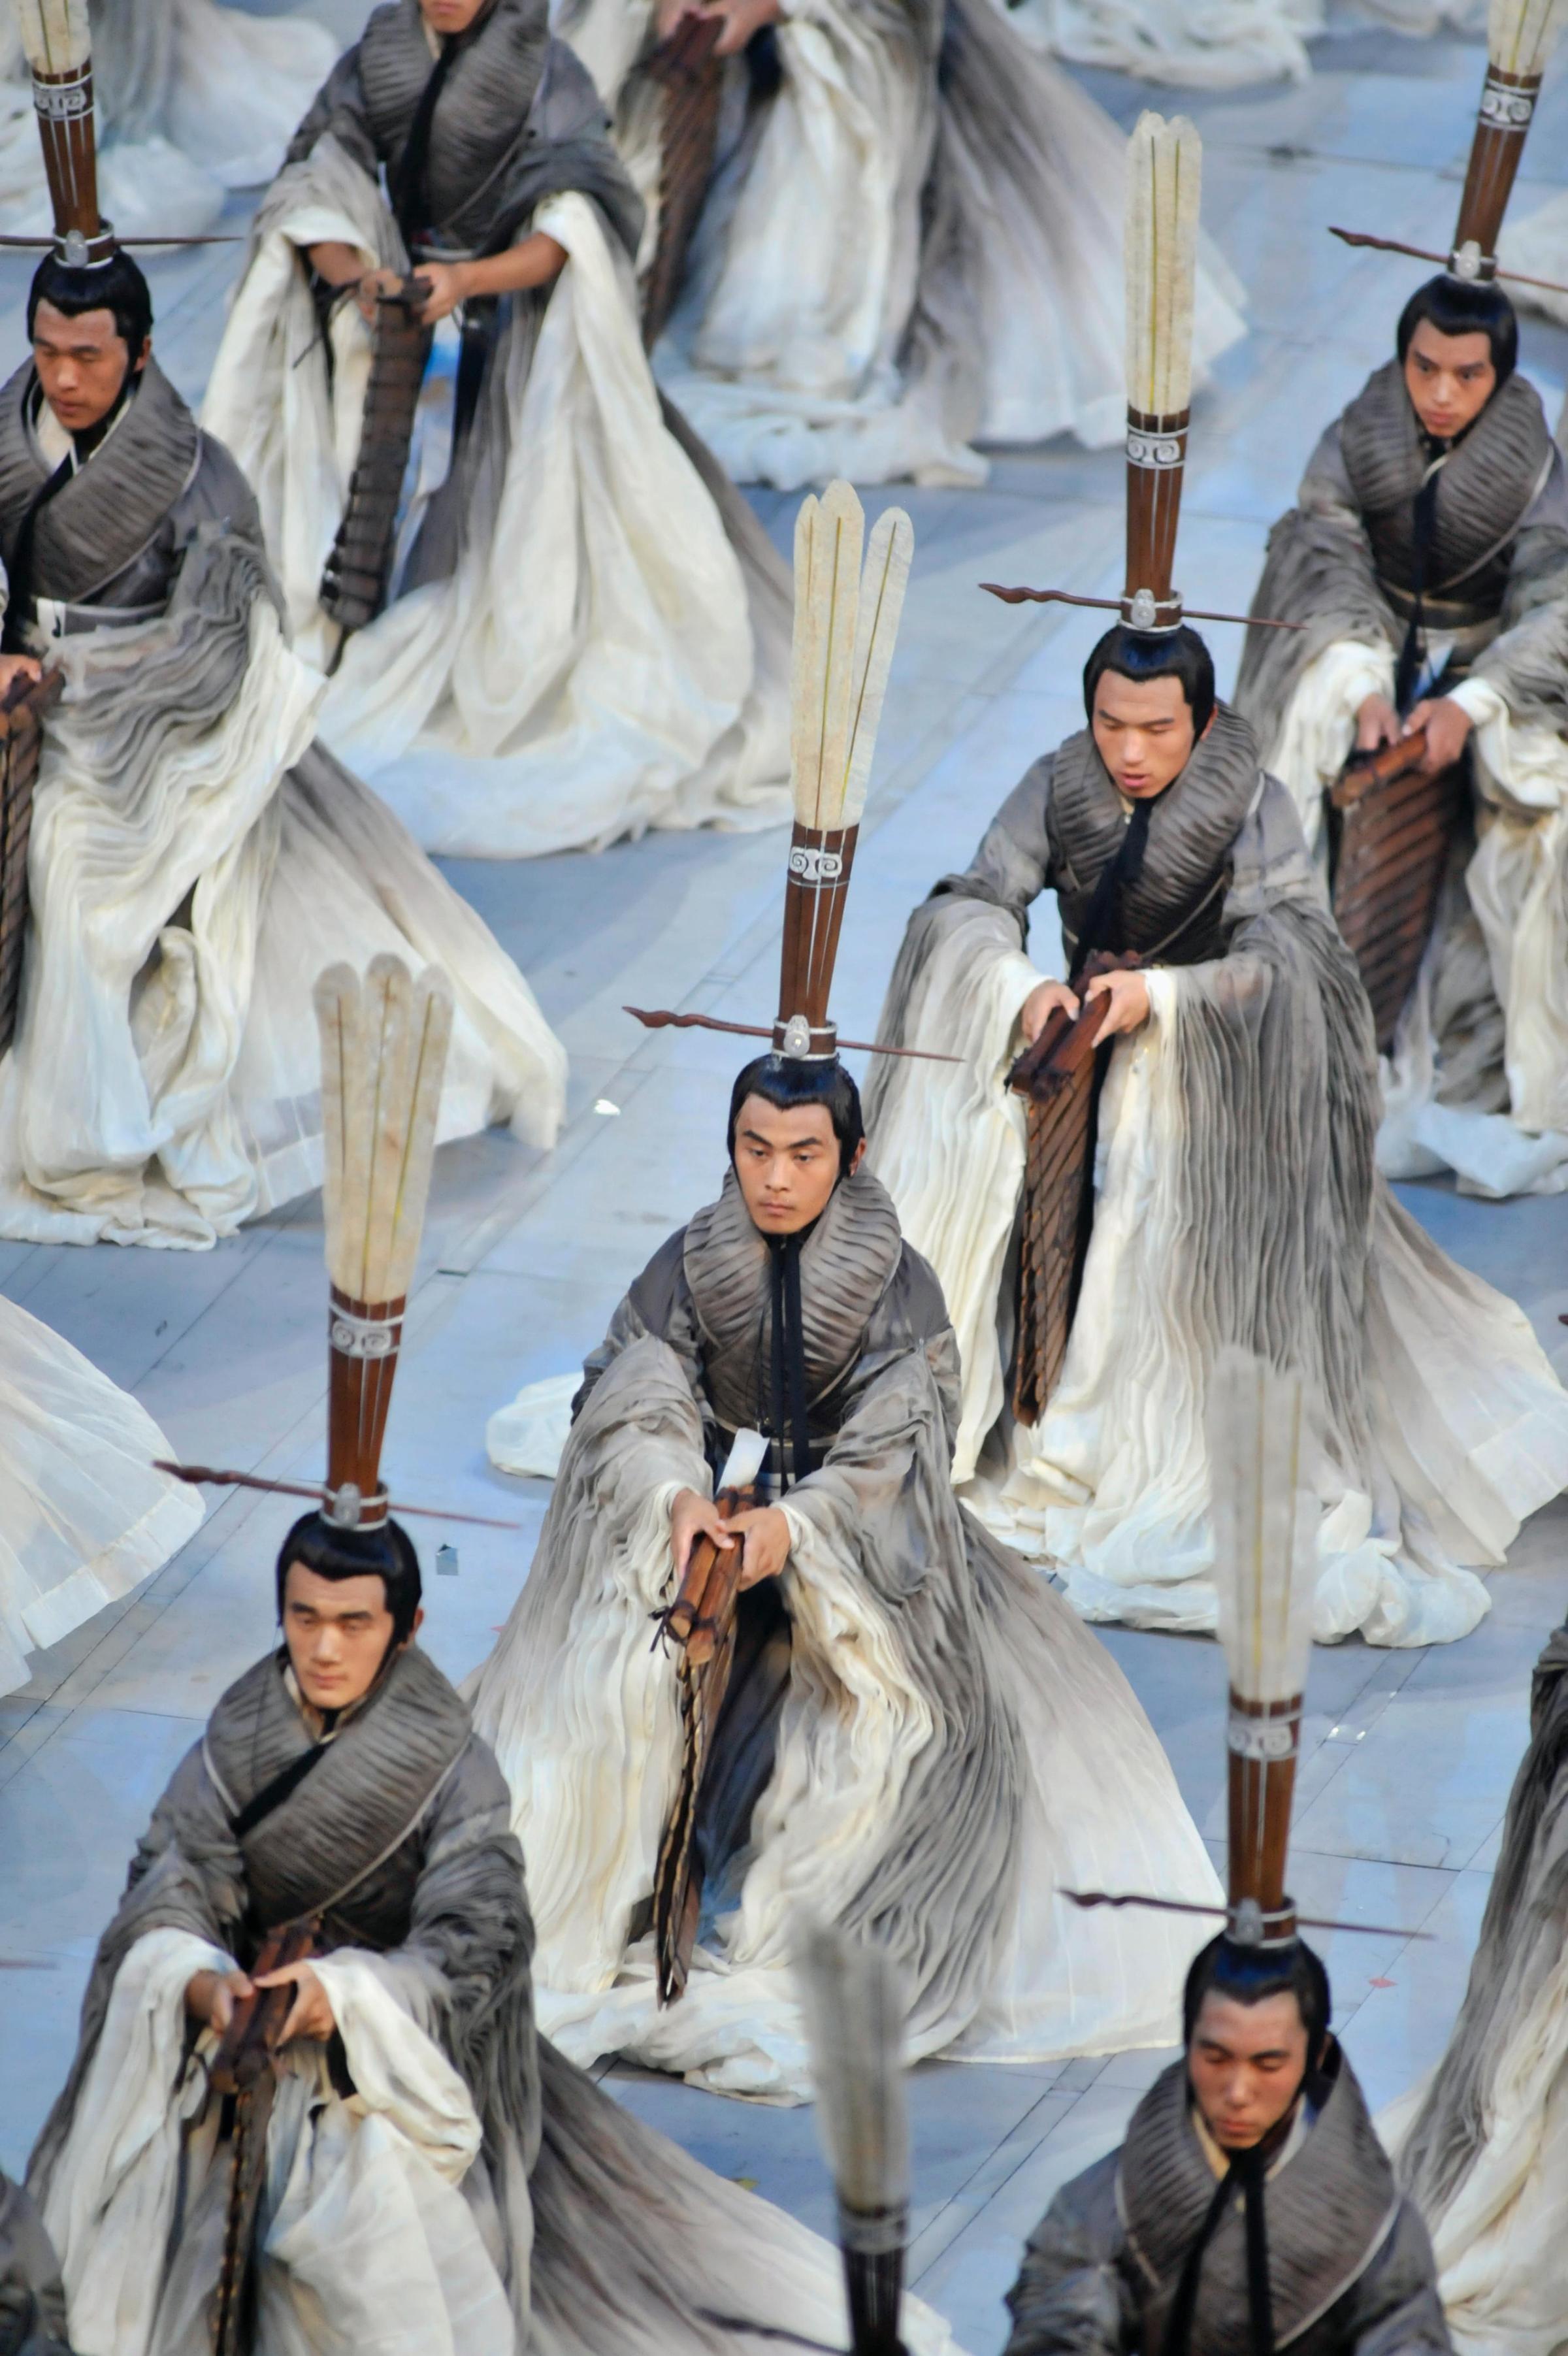 Beijing, 2008Widely regarded to be the most spectacular opening ceremony, Beijing's performance was directed by filmmaker Zhang Yimou and focused on ancient Chinese culture and creativity.